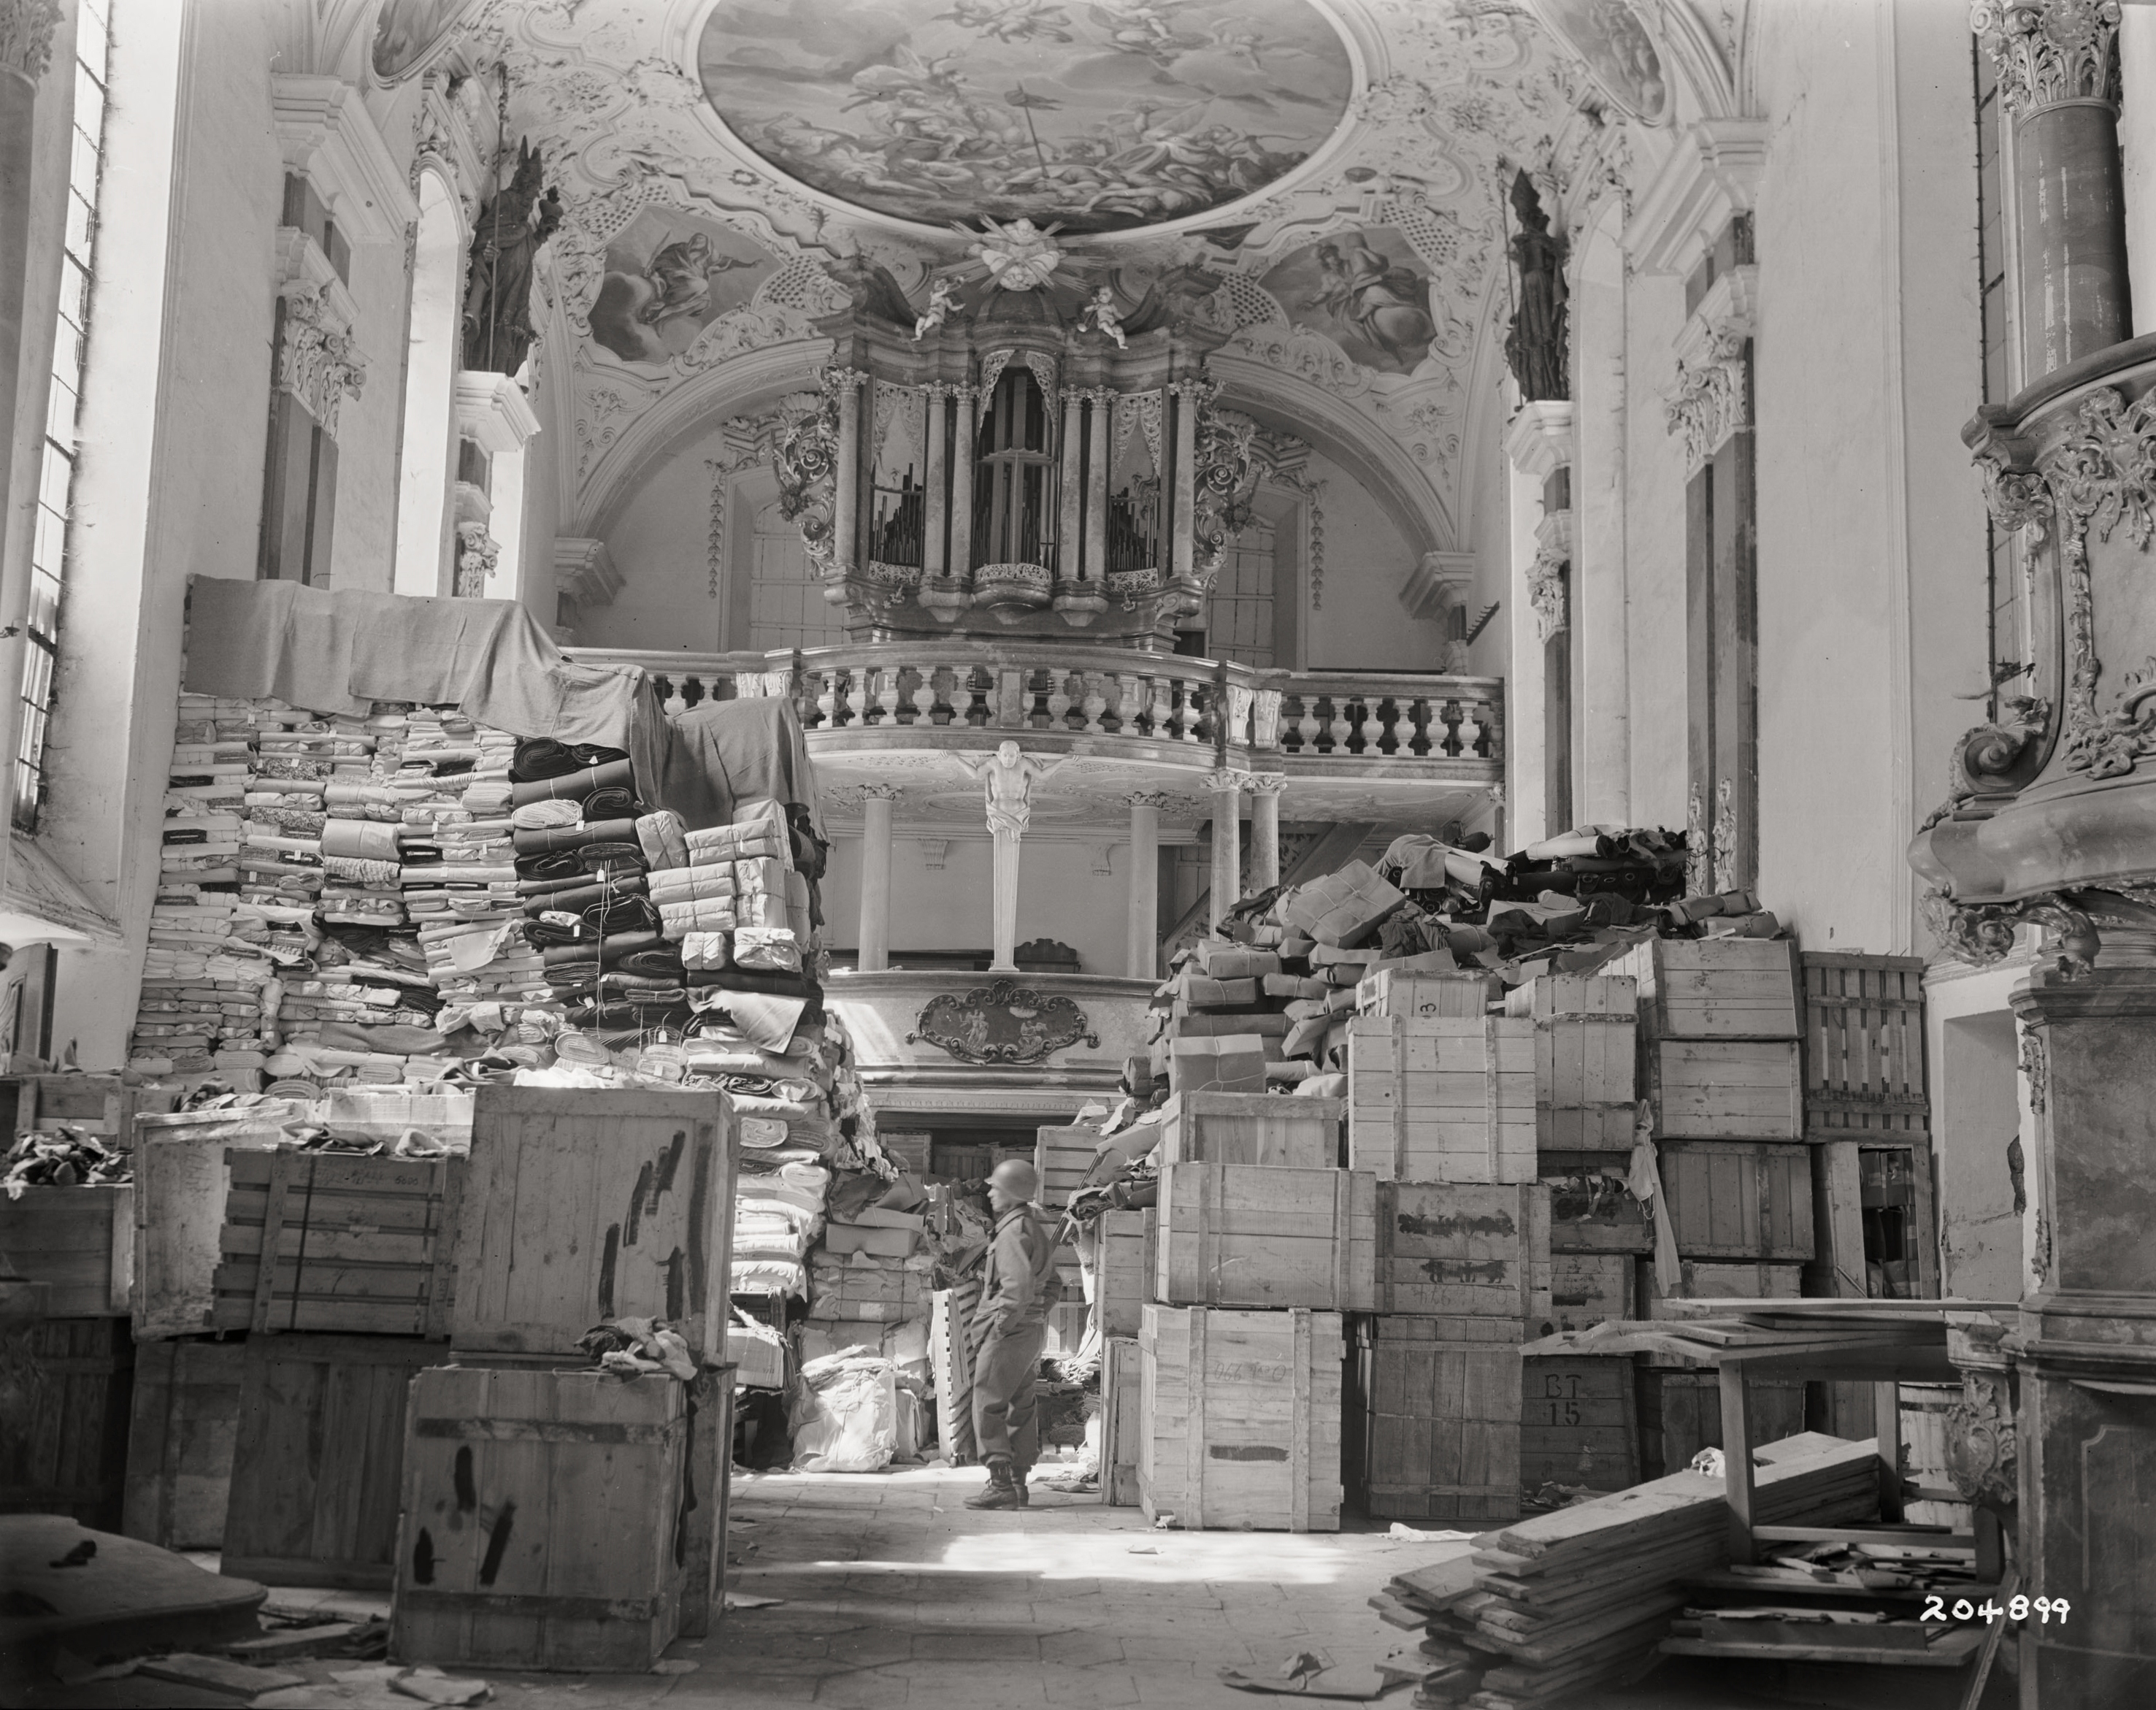 American soldier inspects German loot stored in a church at Elligen, Germany, April 24, 1945